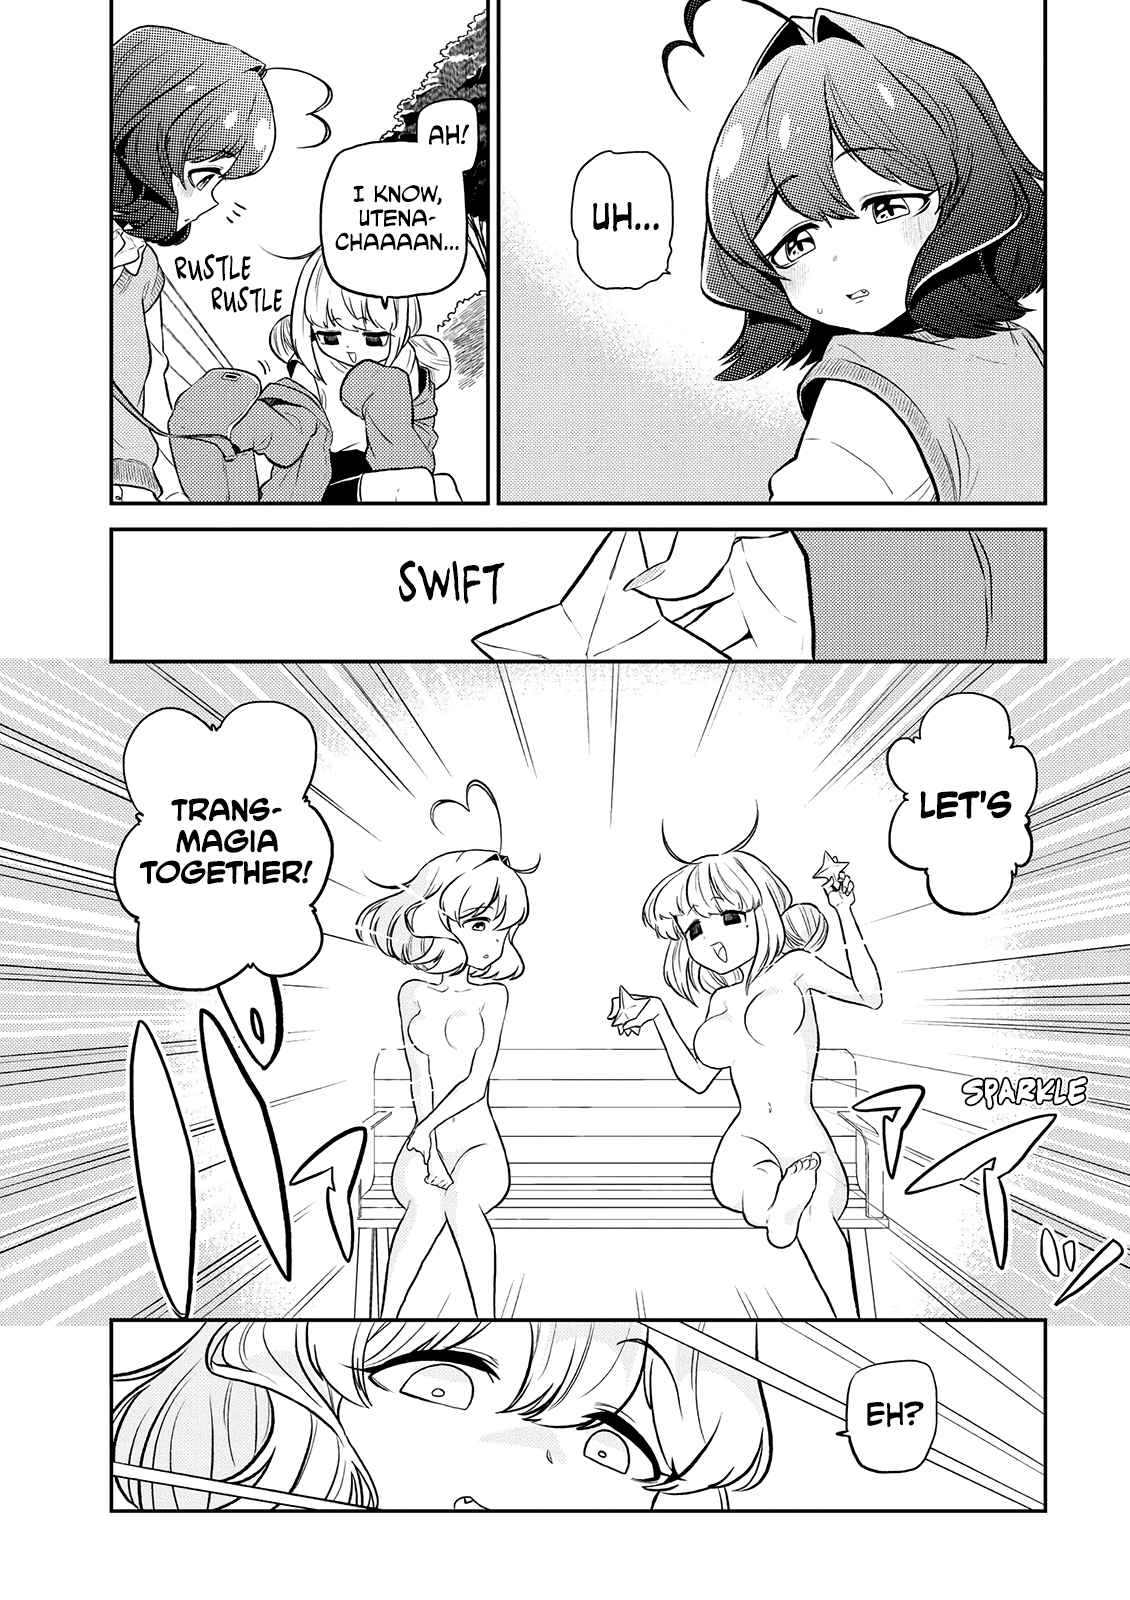 Looking Up To Magical Girls Vol. 1 Ch. 7